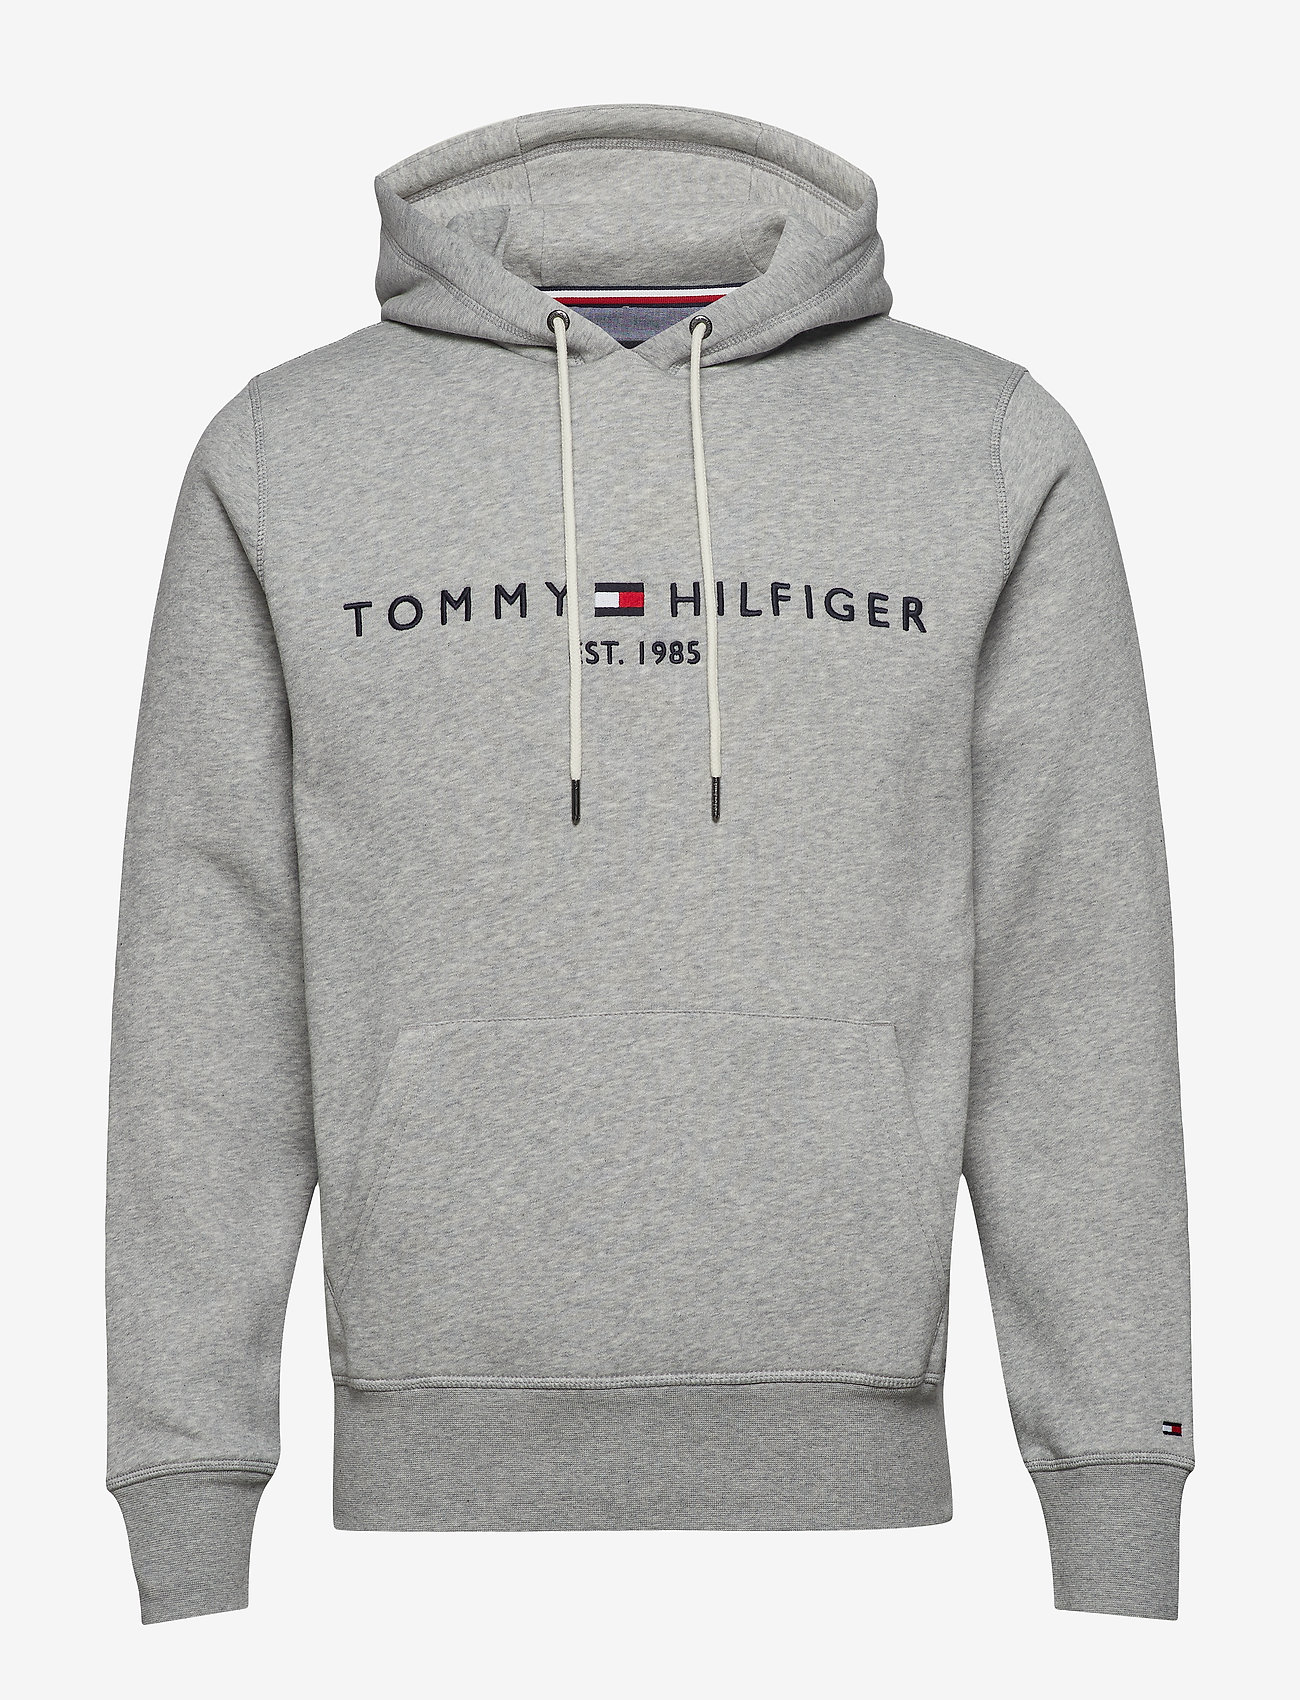 Tommy Boozt Outlet, 53% OFF | www.lasdeliciasvejer.com